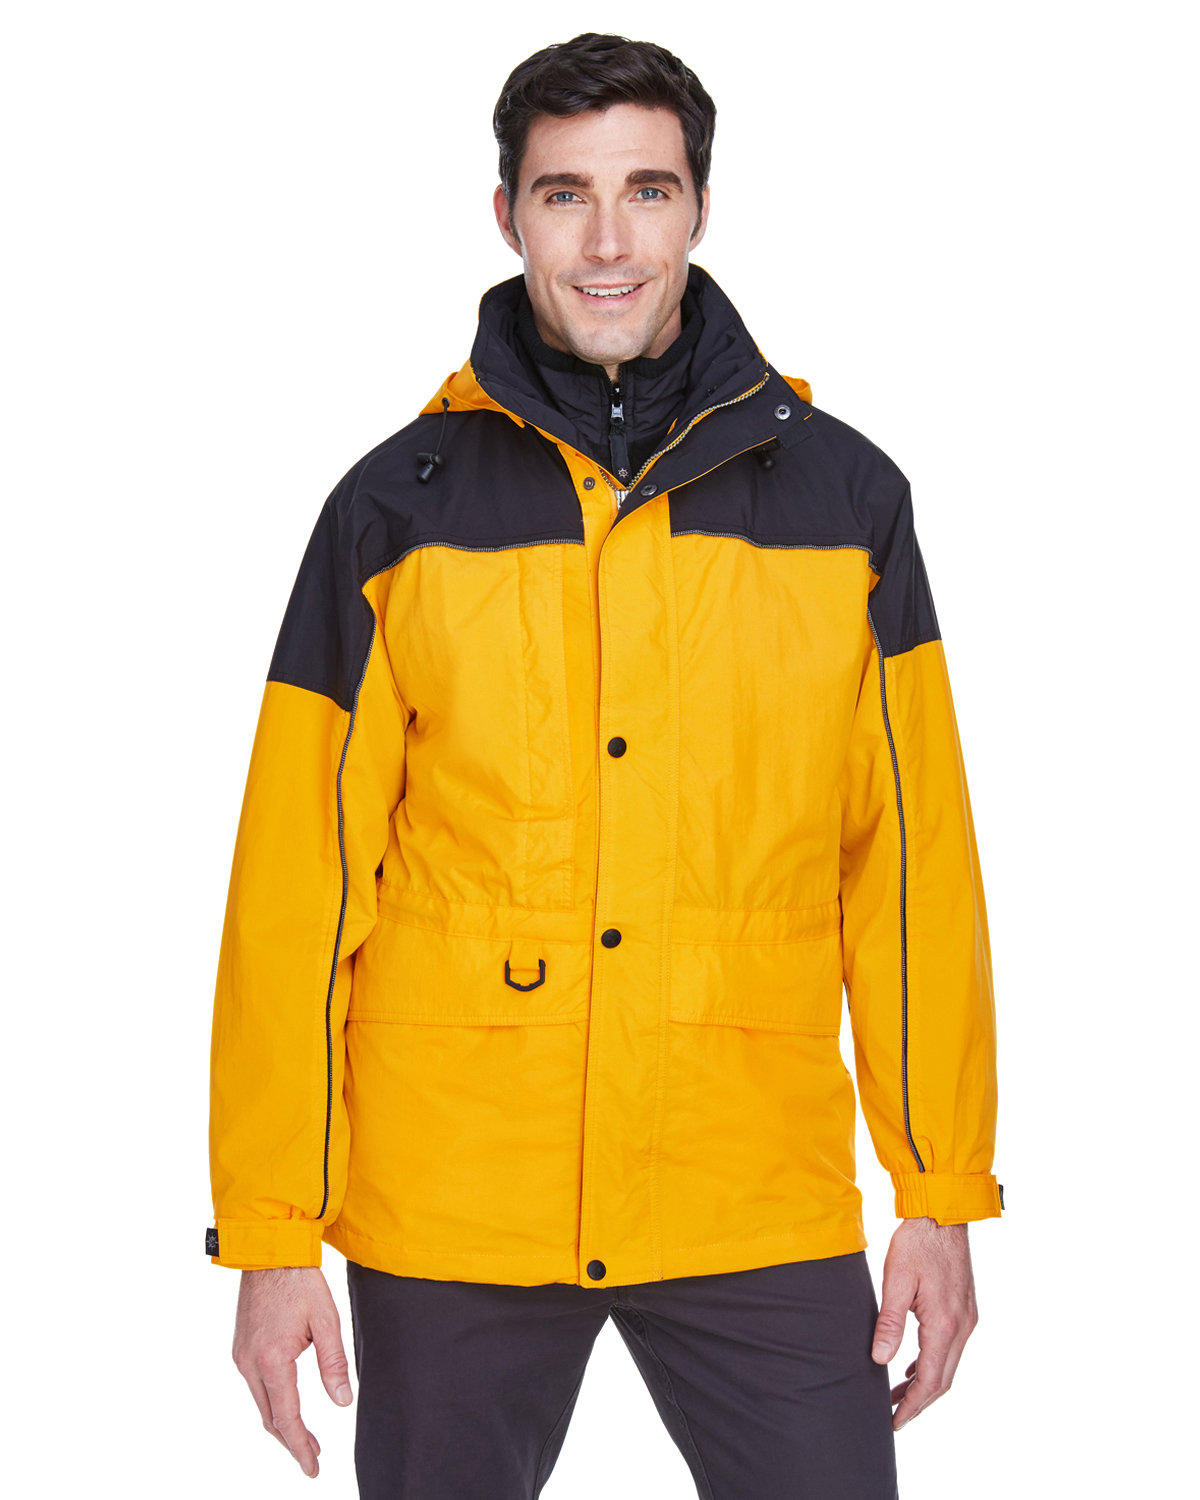 North End Adult 3-in-1 Two-Tone Parka SUN RAY 